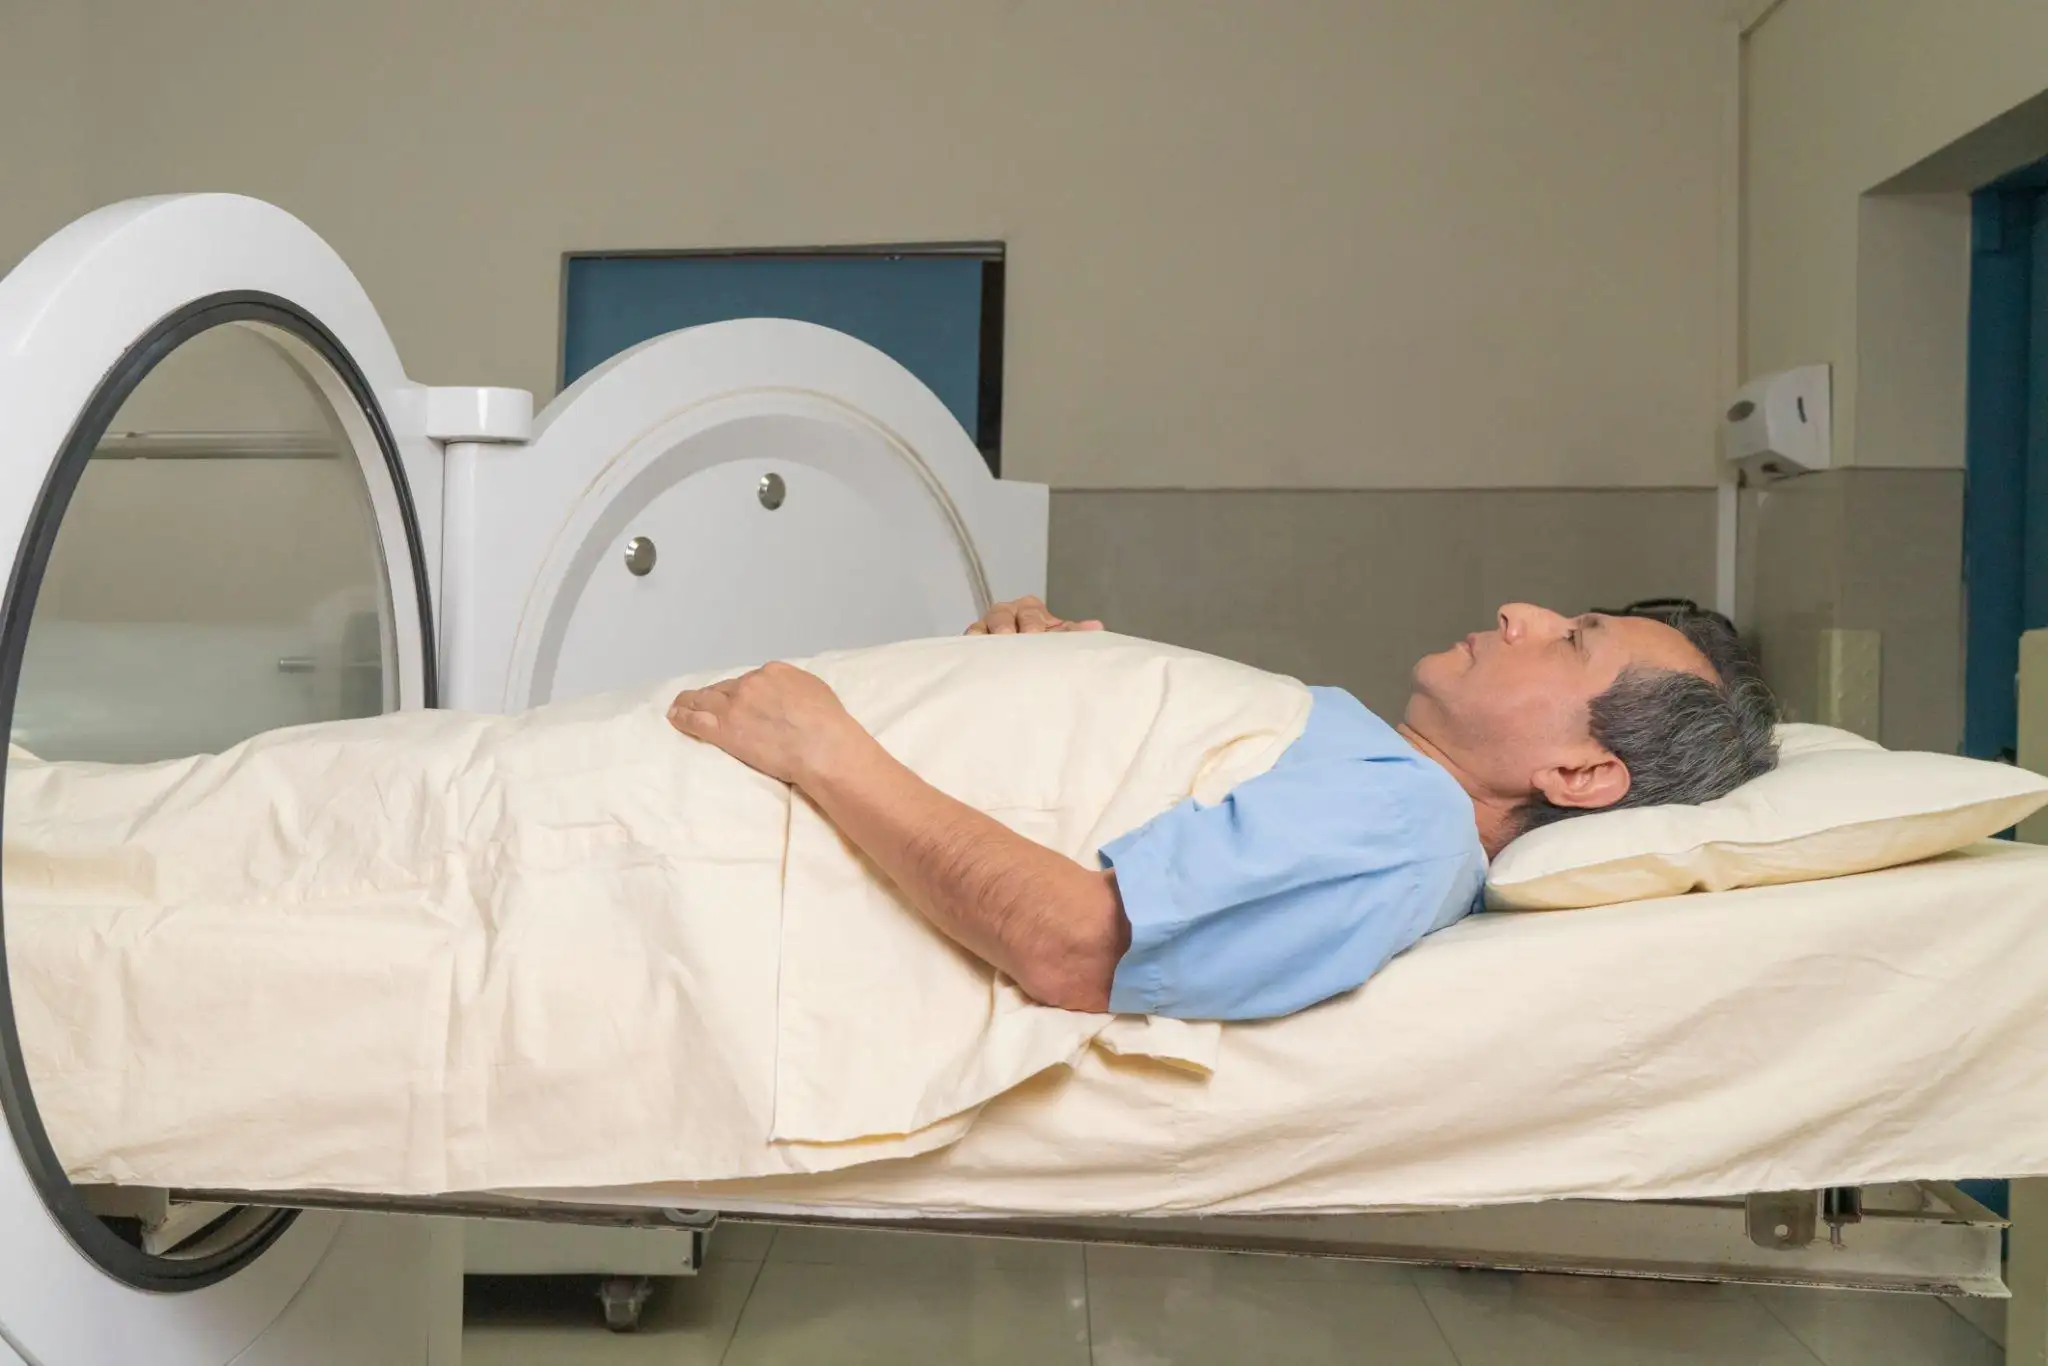 Do You Need A License To Operate A Hyperbaric Chamber?